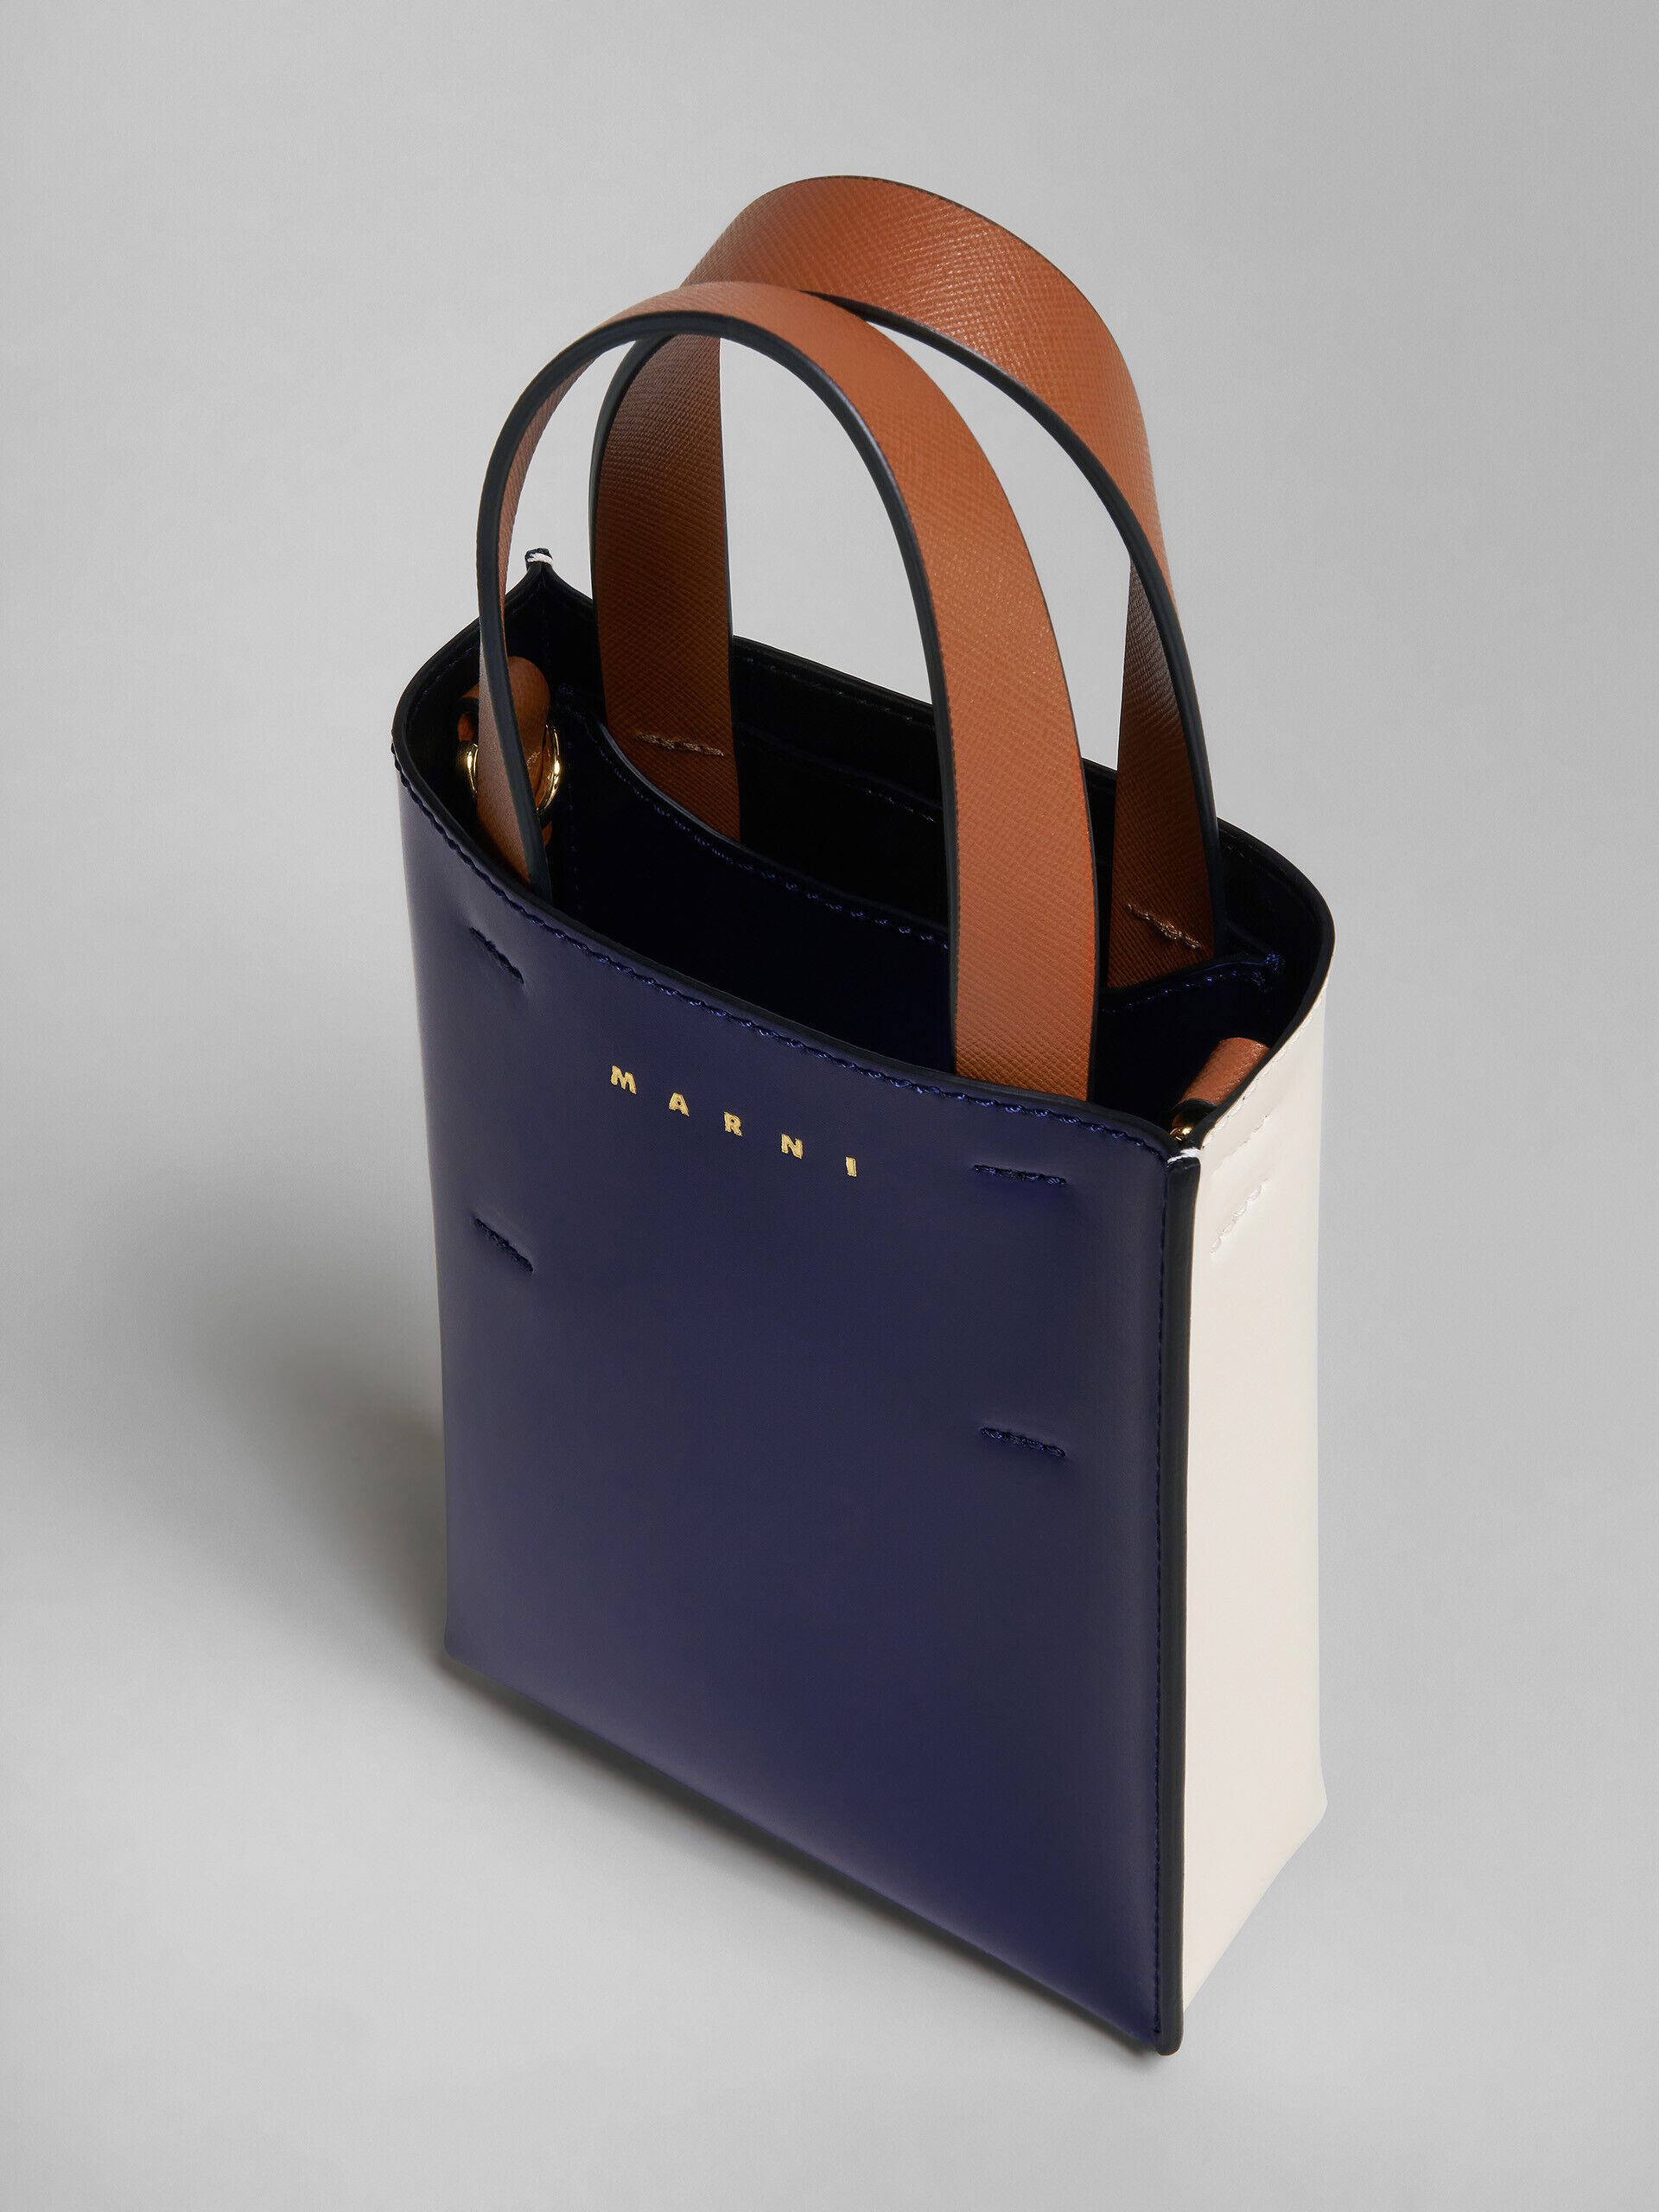 MUSEO nano bag in blue and white leather | Marni